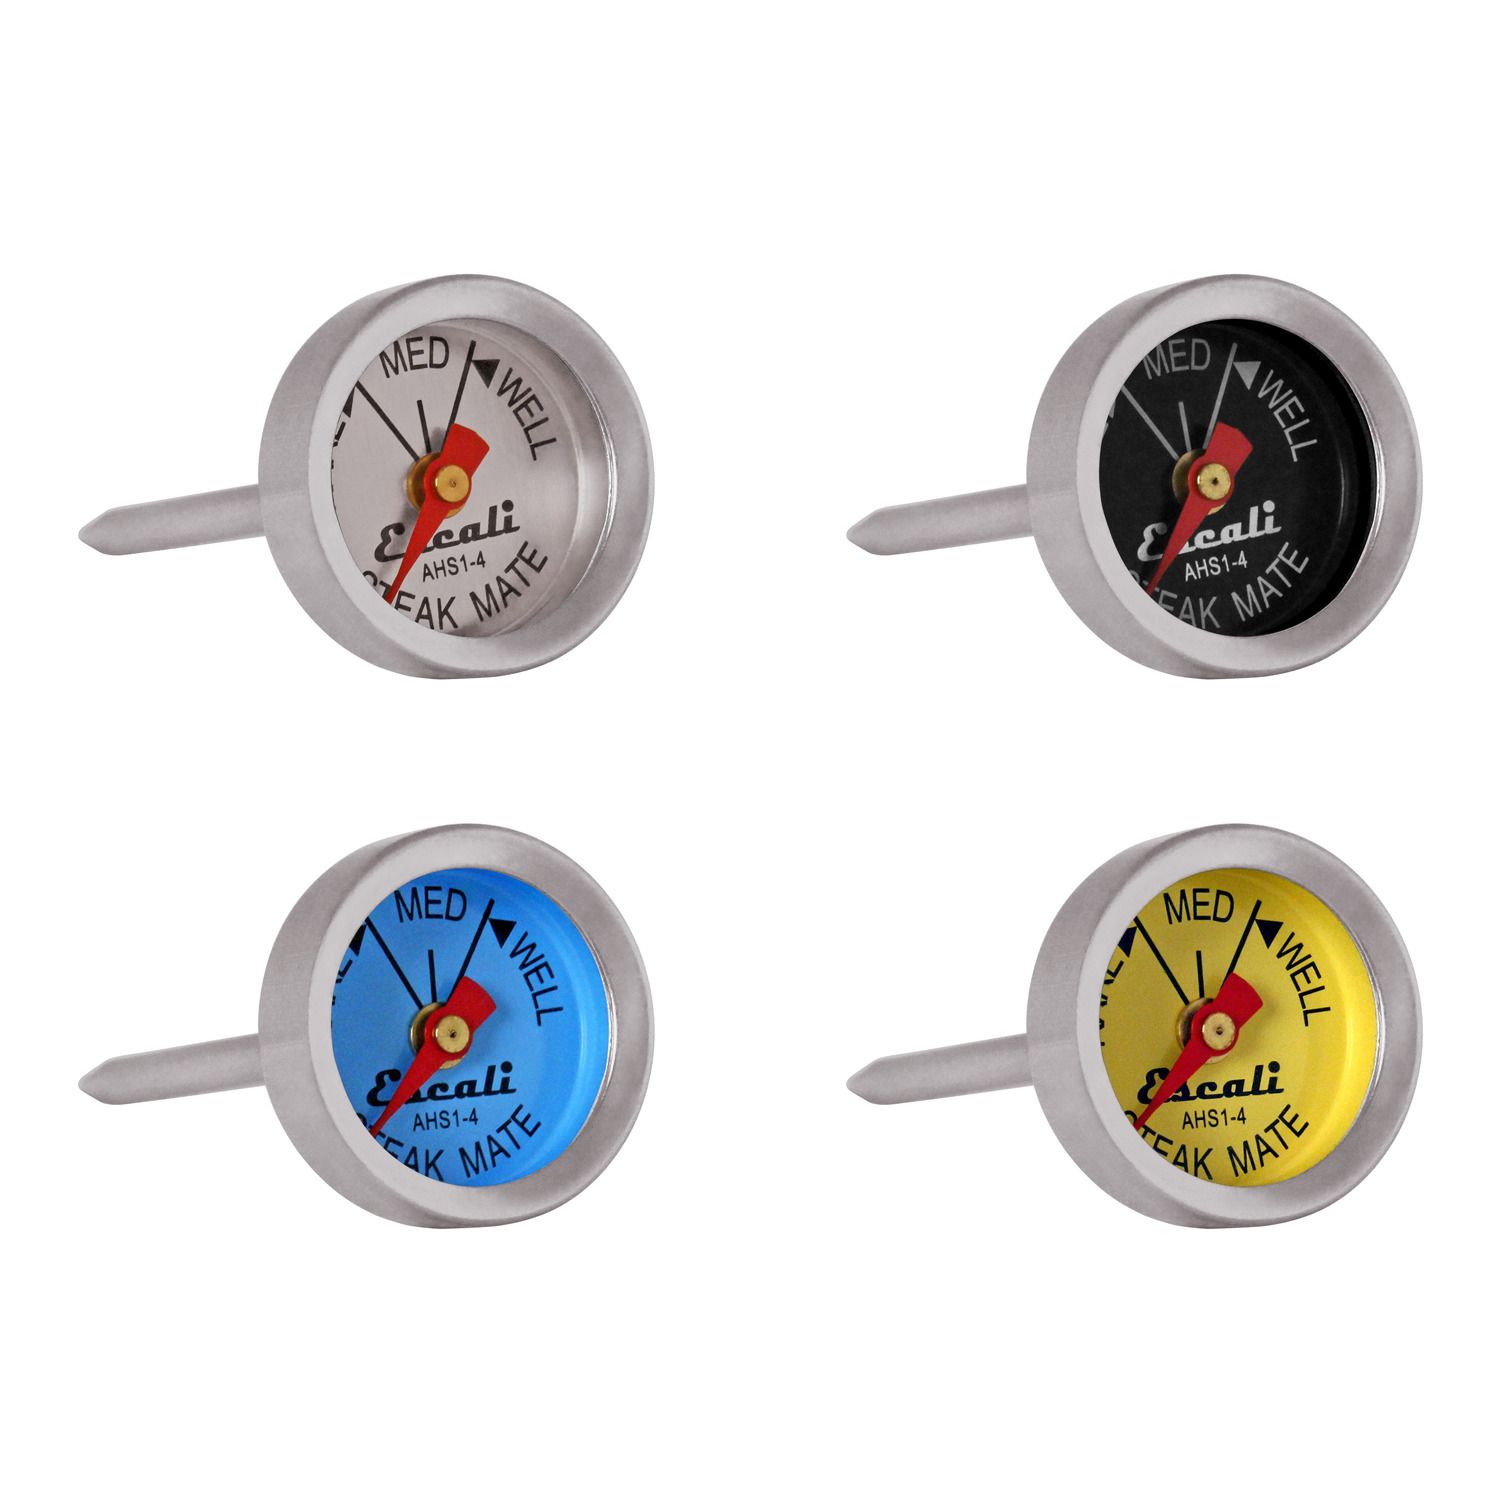 KT Thermo Steak Button Thermometer, Poultry Meat Thermometer, Instant Read Food Stainless Steel Dial Thermometers, Grill Mates Barbecue BBQ Tools